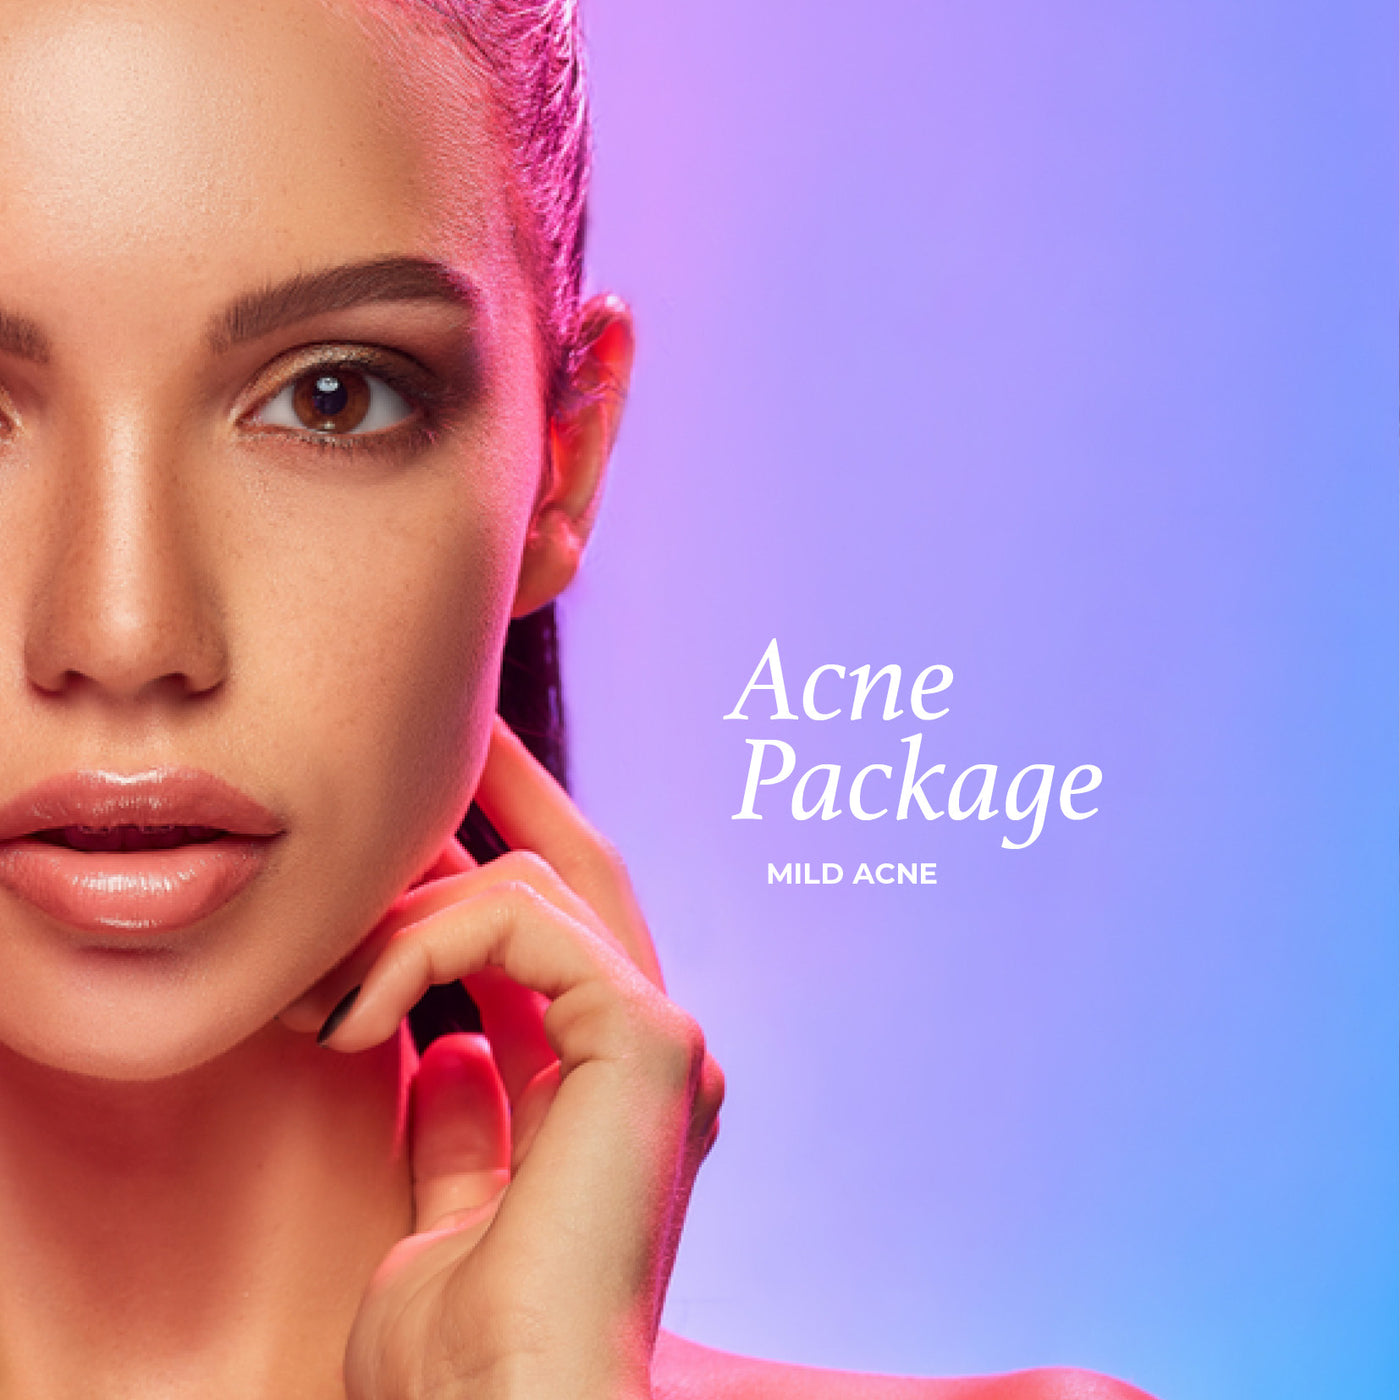 Acne Package - Mild